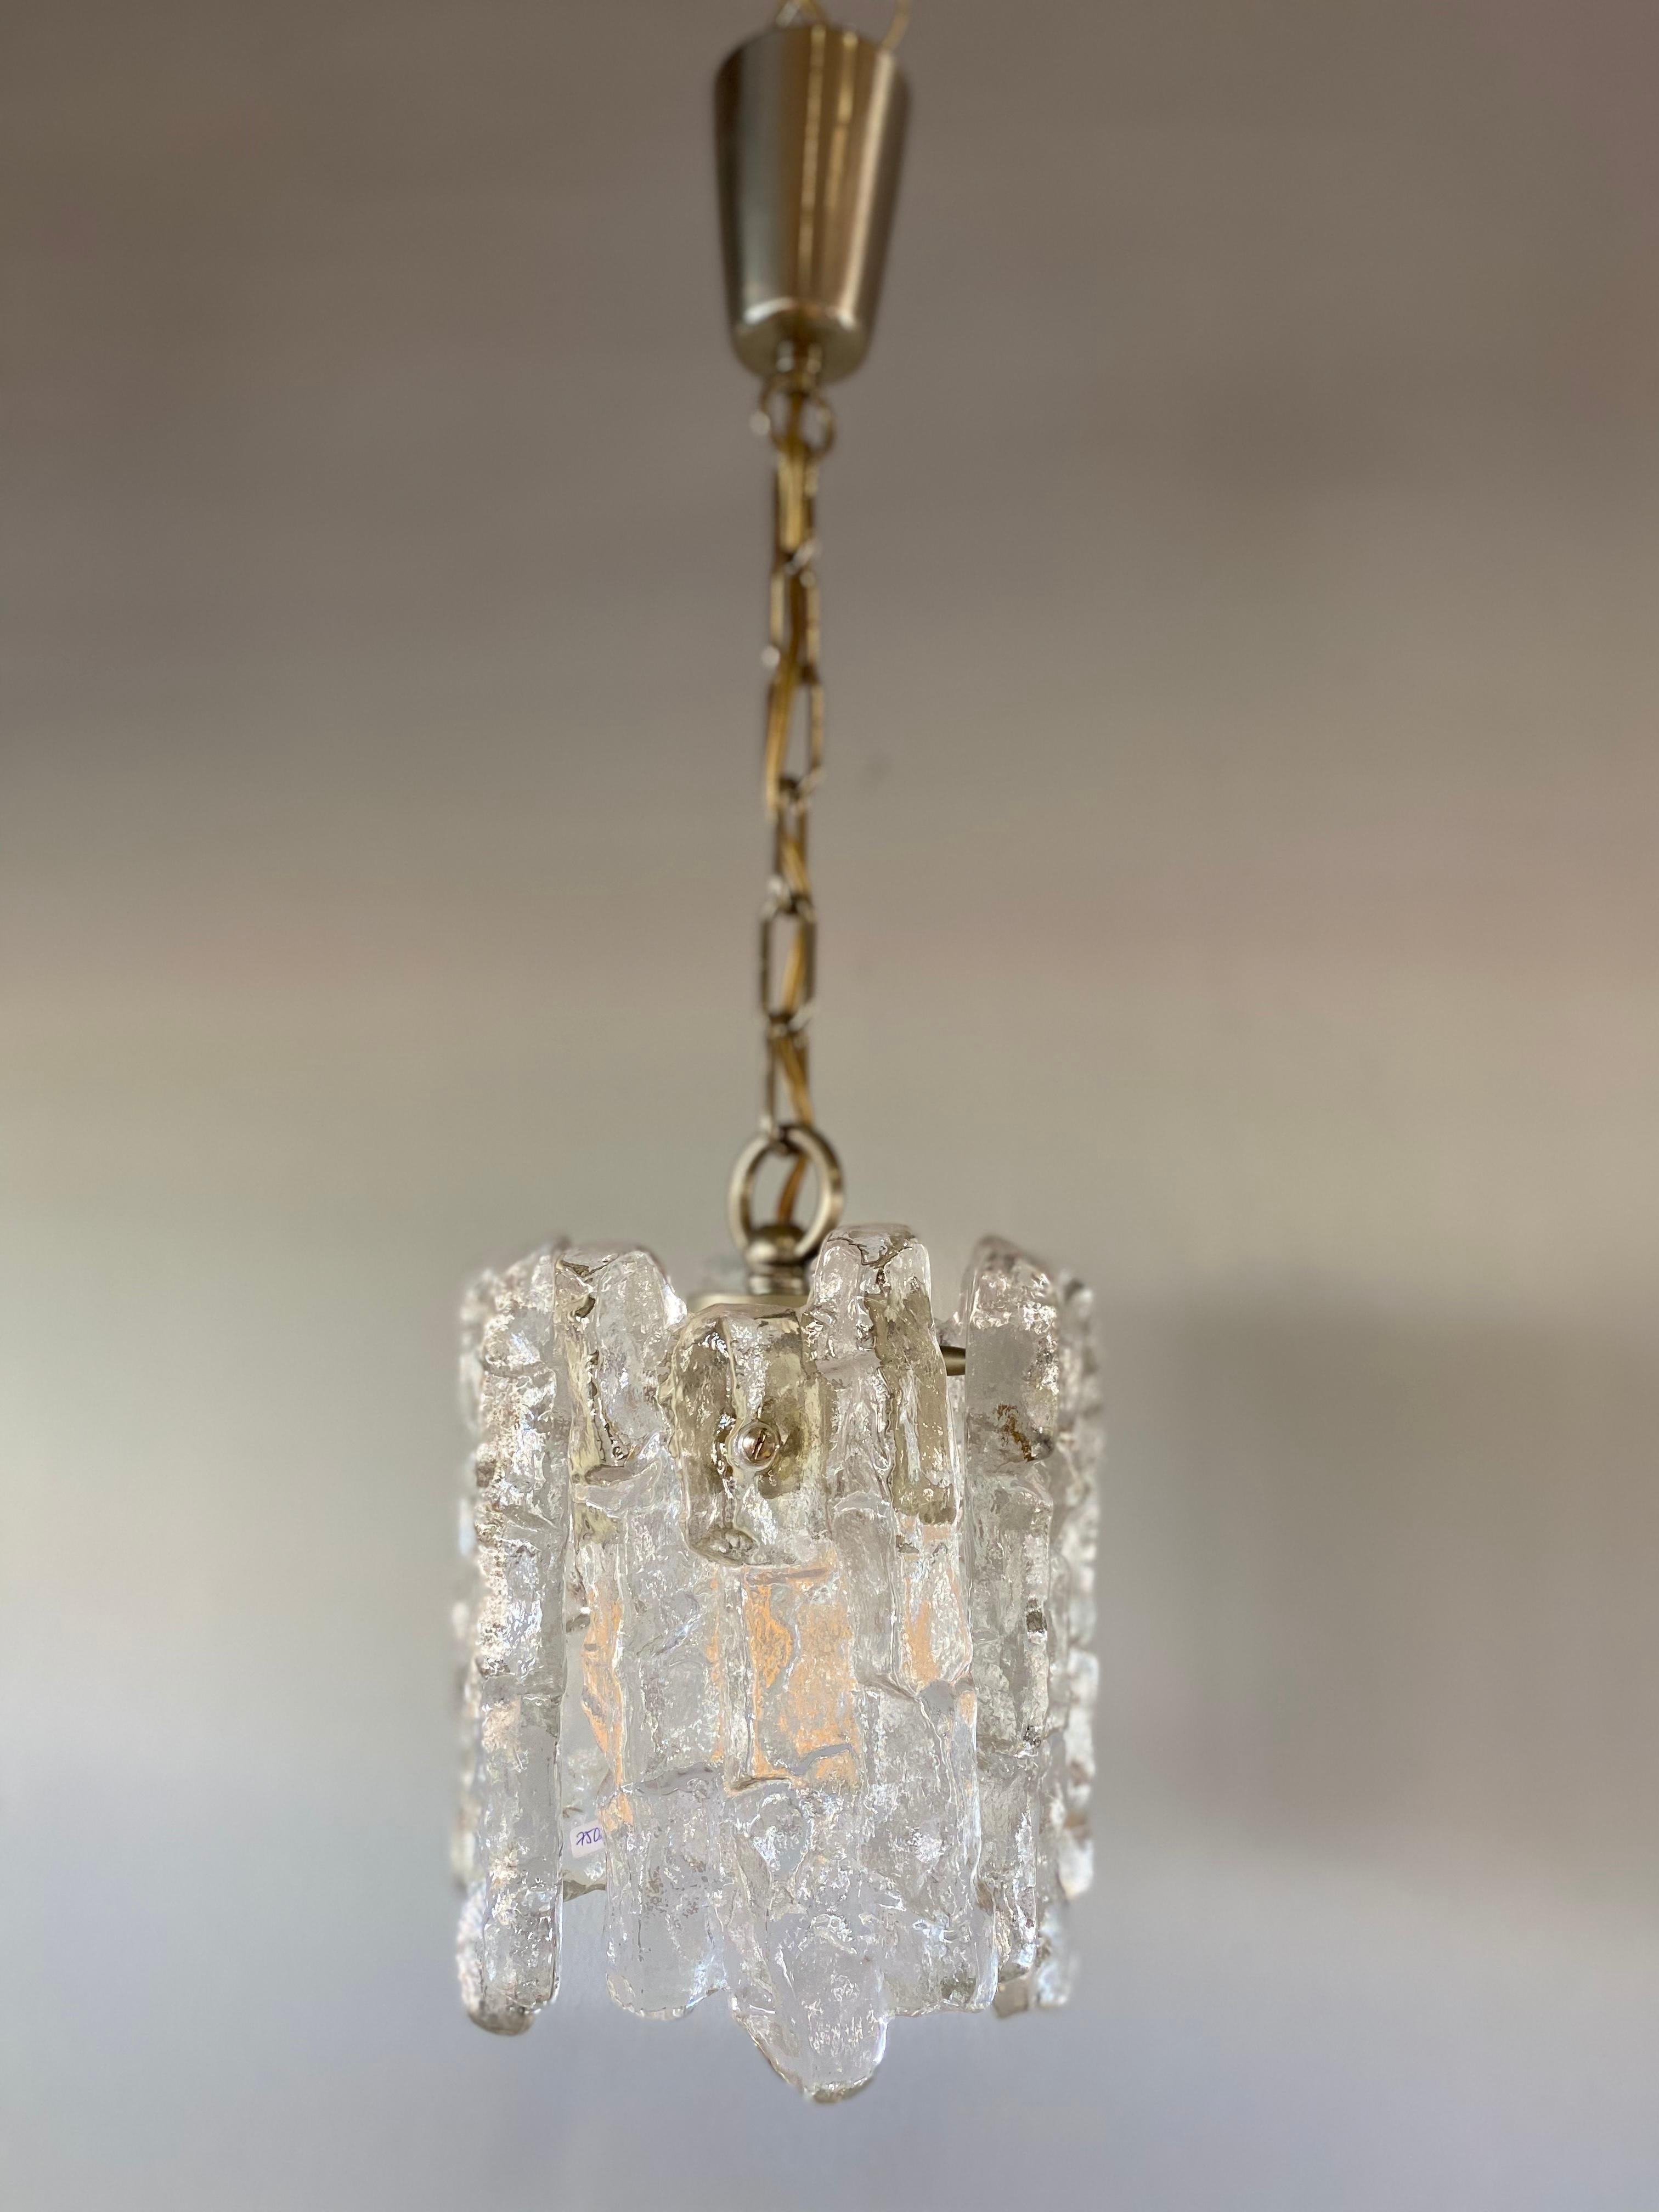 Small J.T. Kalmar 'Ice Glass' chandelier, 1960s with one lamp socket
This chandelier from the 1960s by the Austrian designer J.T. Kalmar apparently more than deserves the name ice glass. The glass icicles lined up together form the lampshade of the